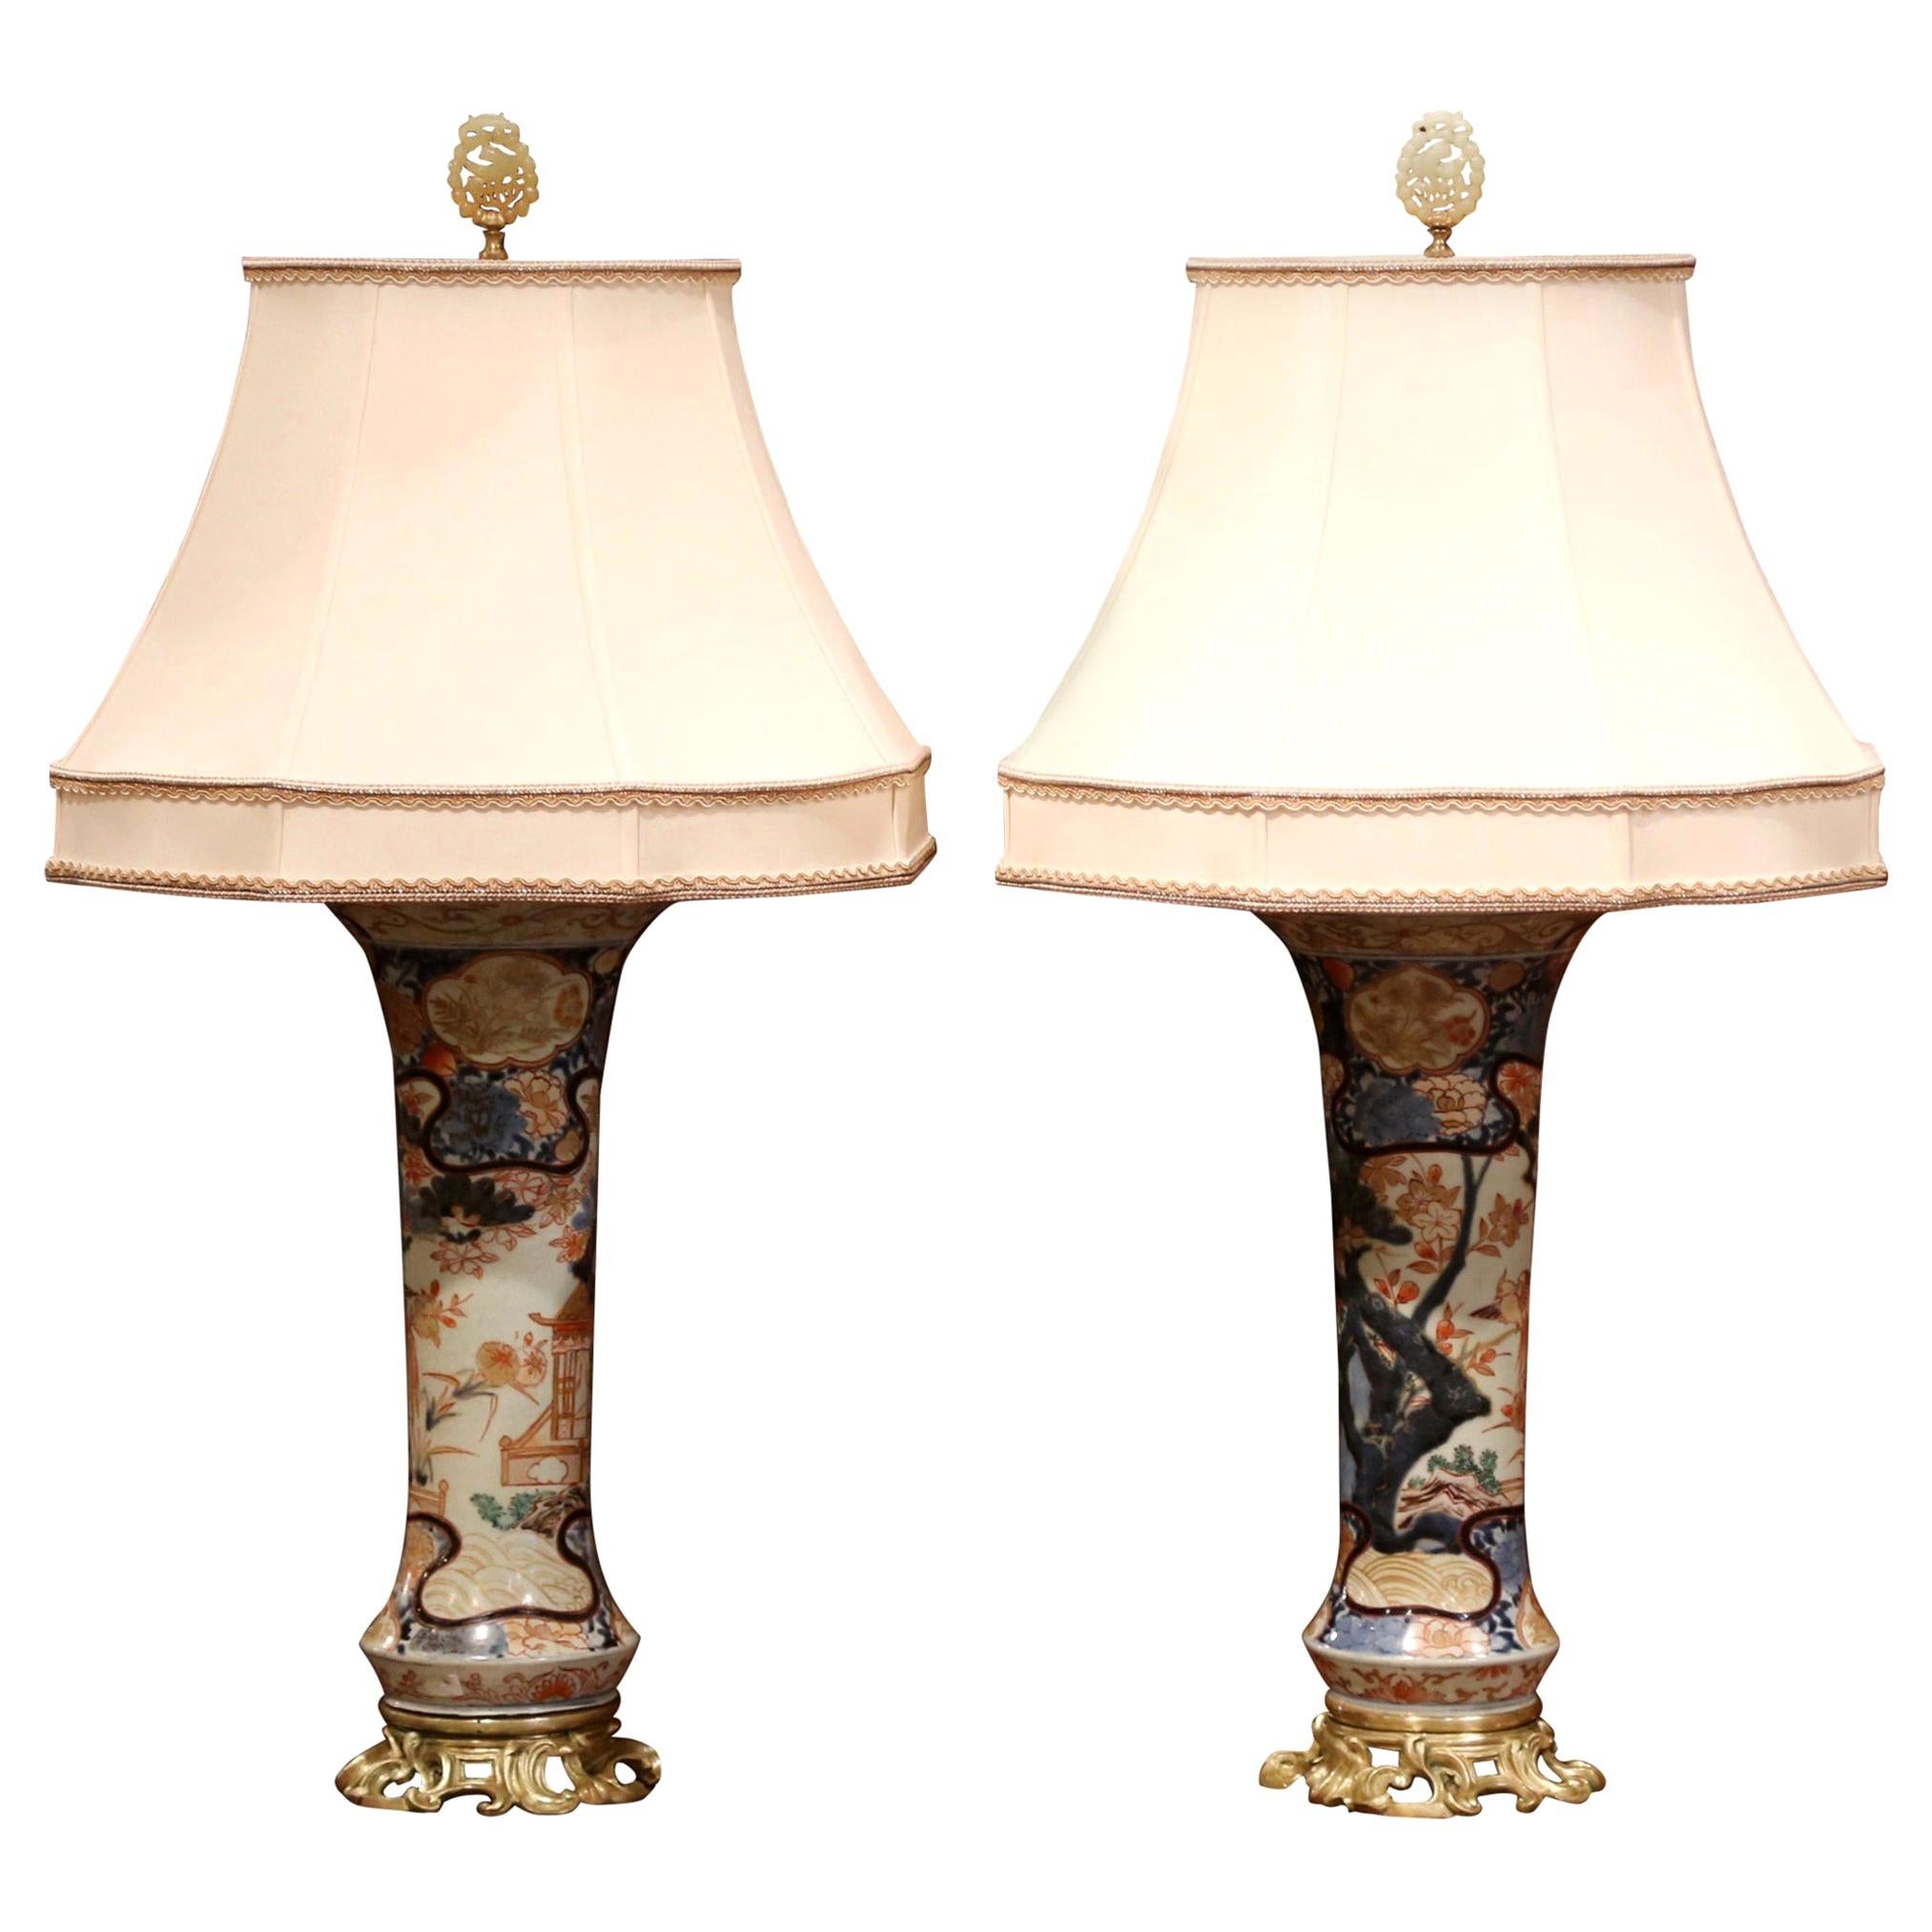 Pair of 19th Century Painted Porcelain and Bronze Japanese Imari Vases Lamps